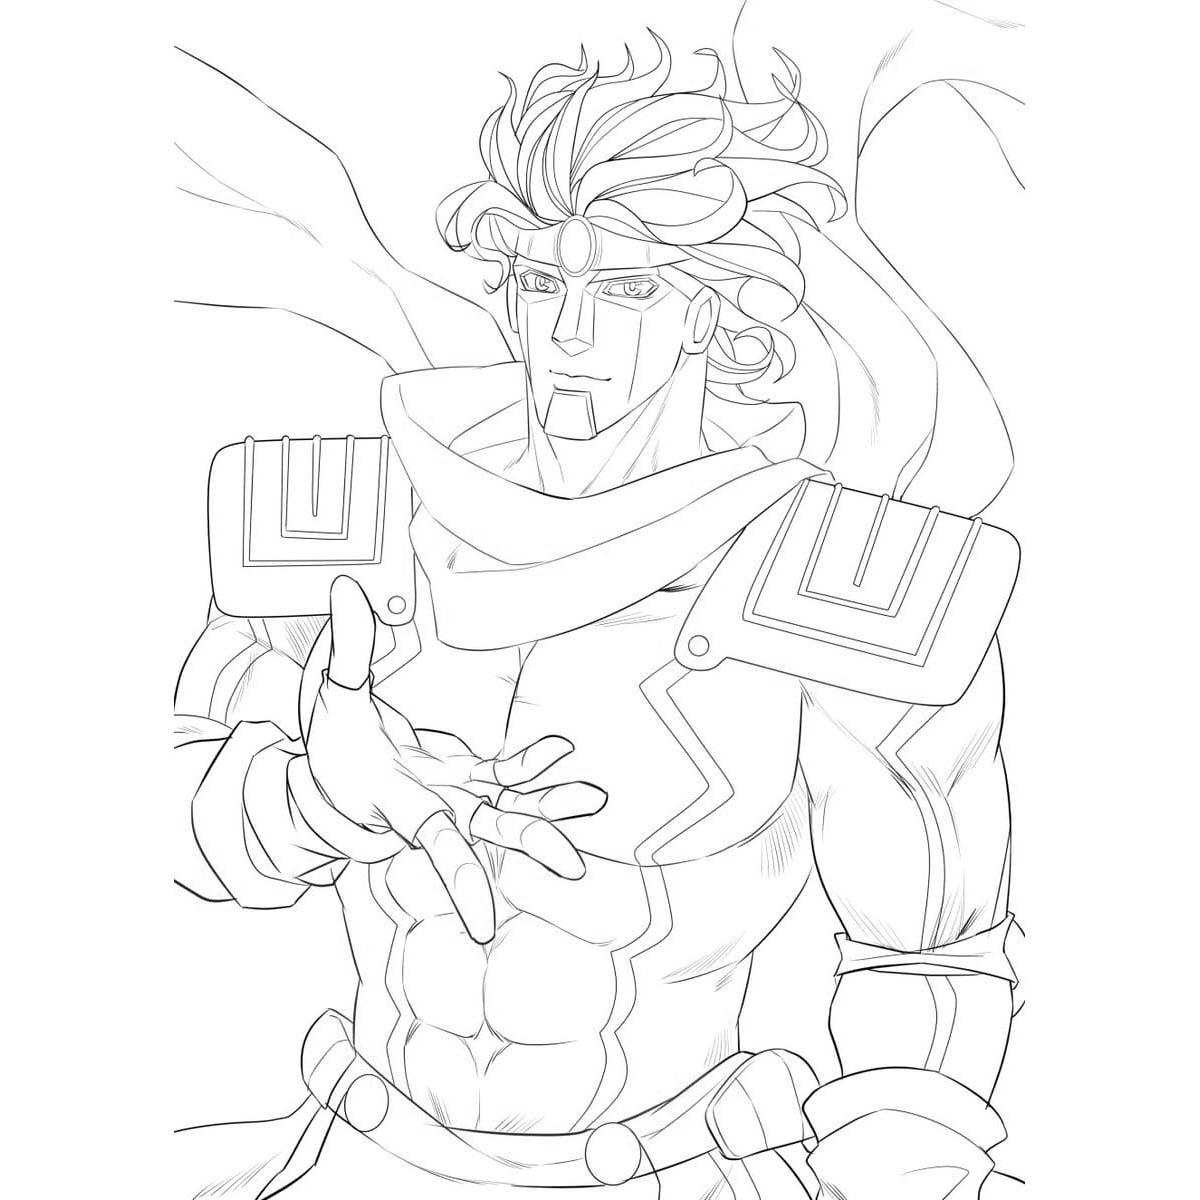 Free JoJo's Bizarre Adventure Coloring Pages Charater Star Platinum printable